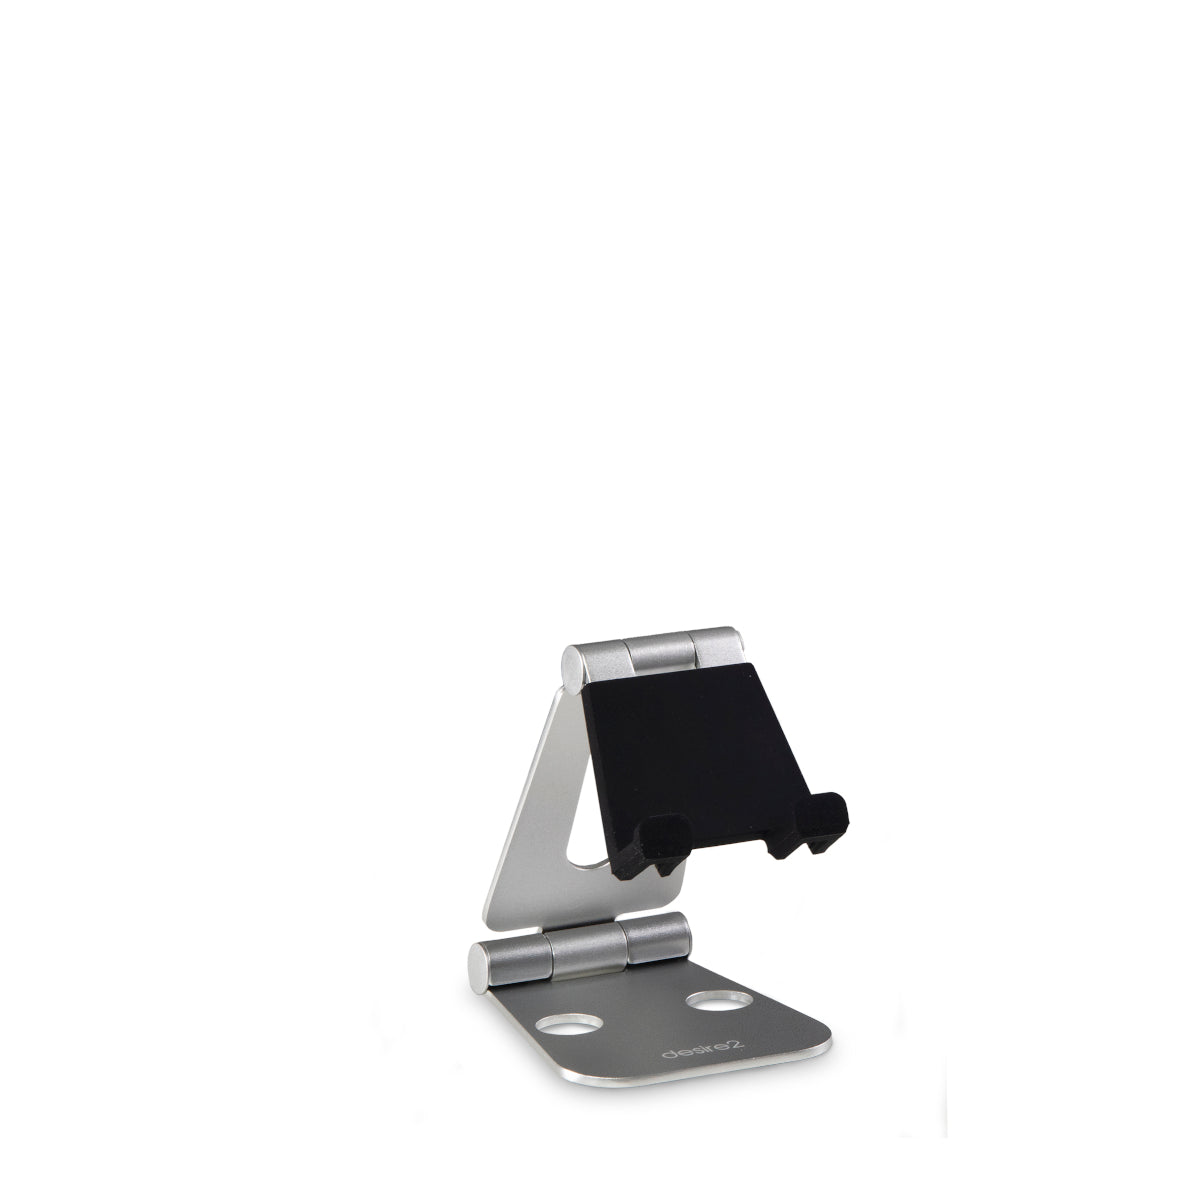 Silver Aluminum desk stand for Tablet and Smartphone with adjustable angles shown in the open position.  The part the holds the device has soft black silicone covering it.  